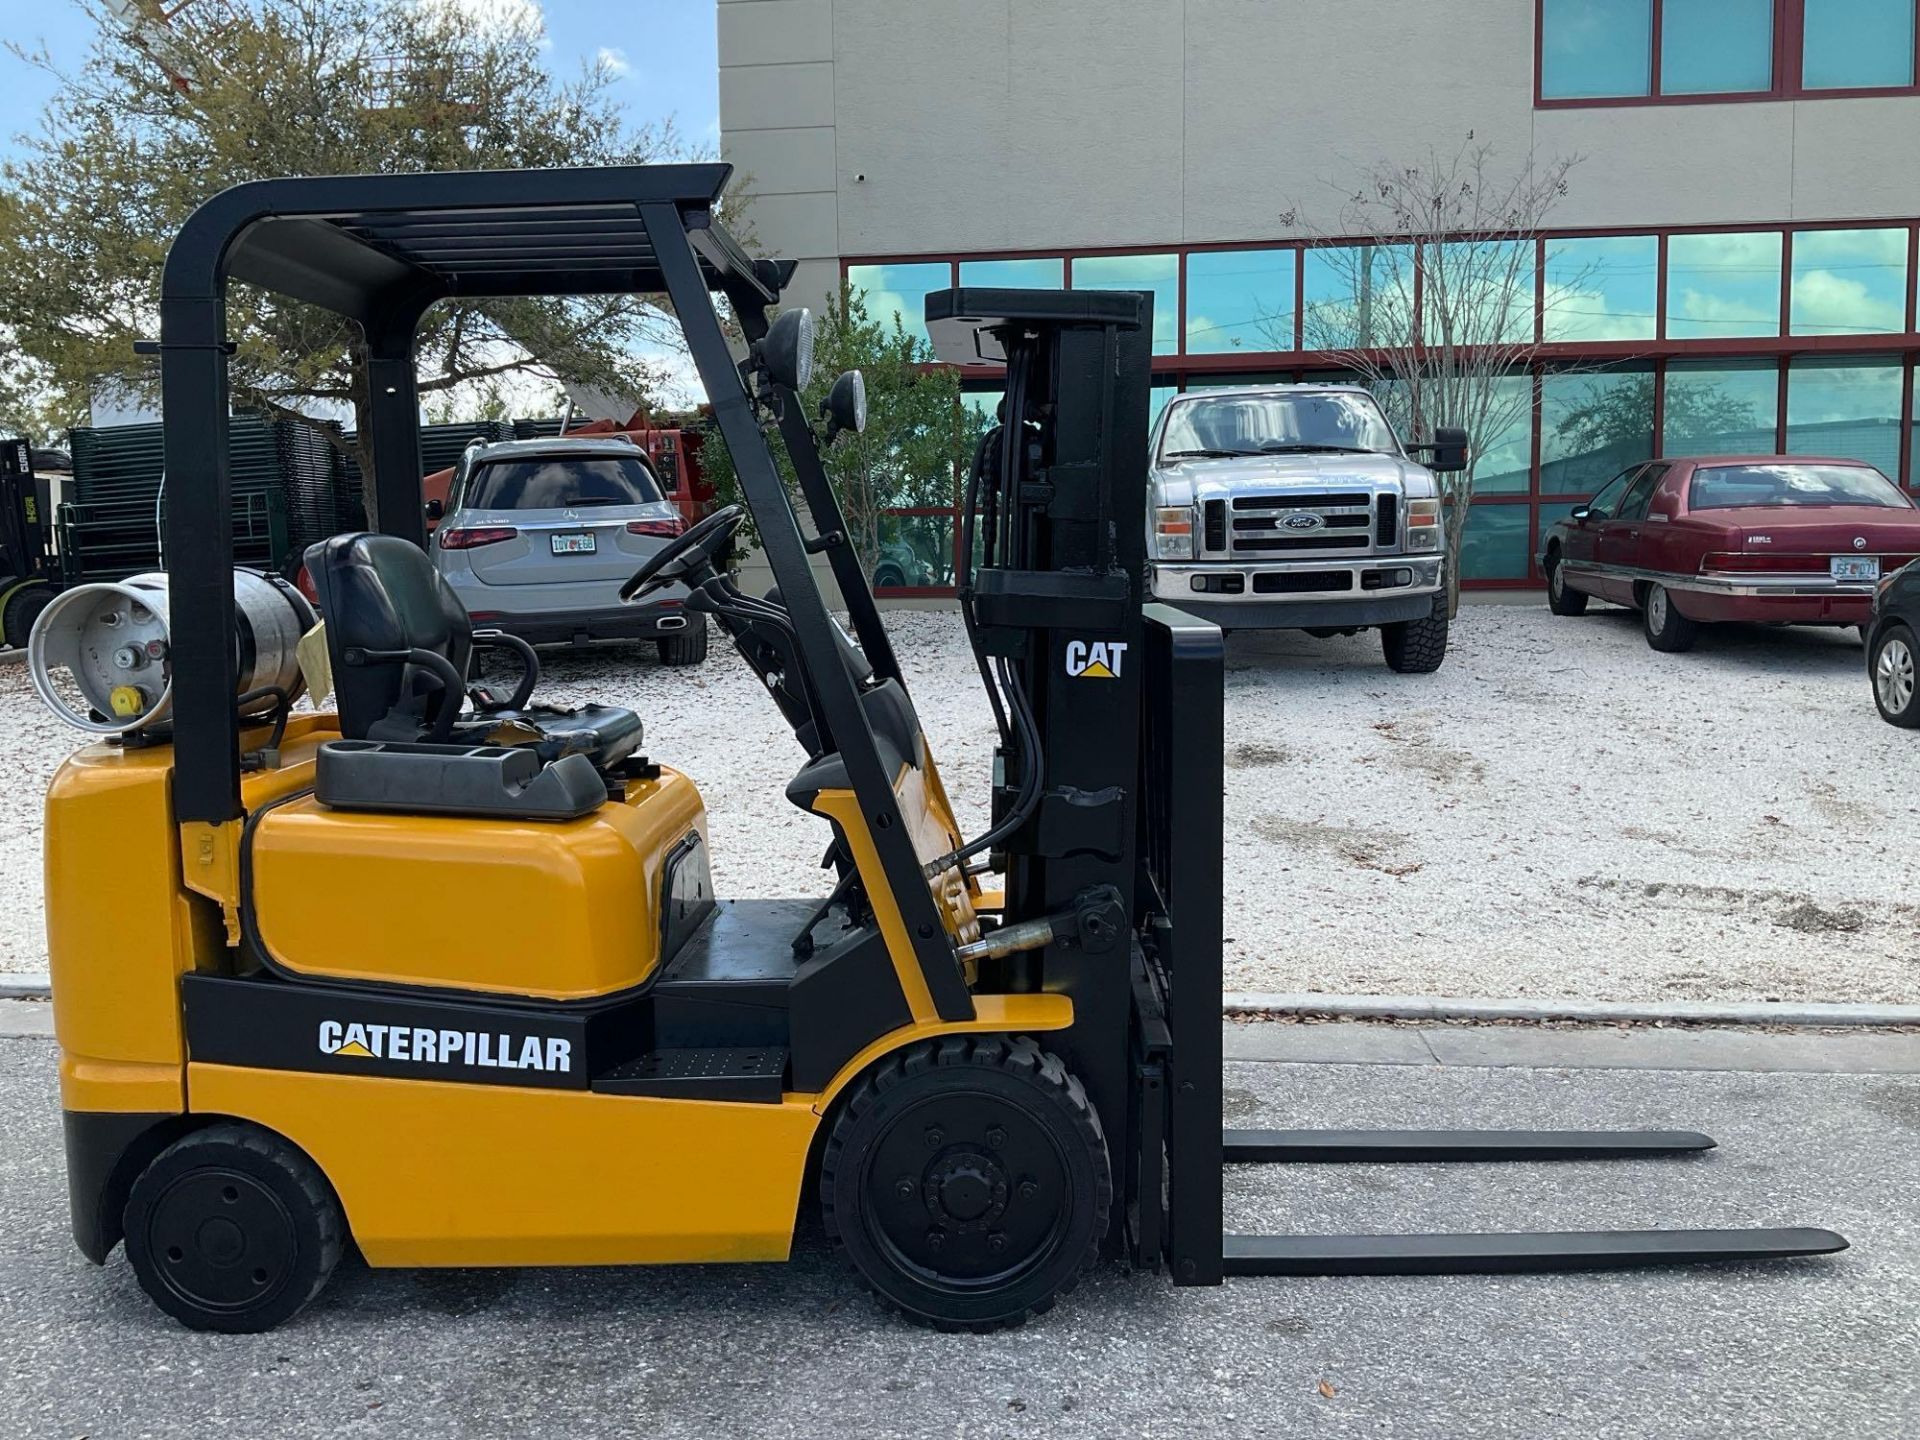 CATERPILLAR FORKLIFT MODEL GC20K, LP POWERED, APPROX MAX CAPACITY 4000LBS, APPROX MAX HEIGHT 160" - Image 2 of 12